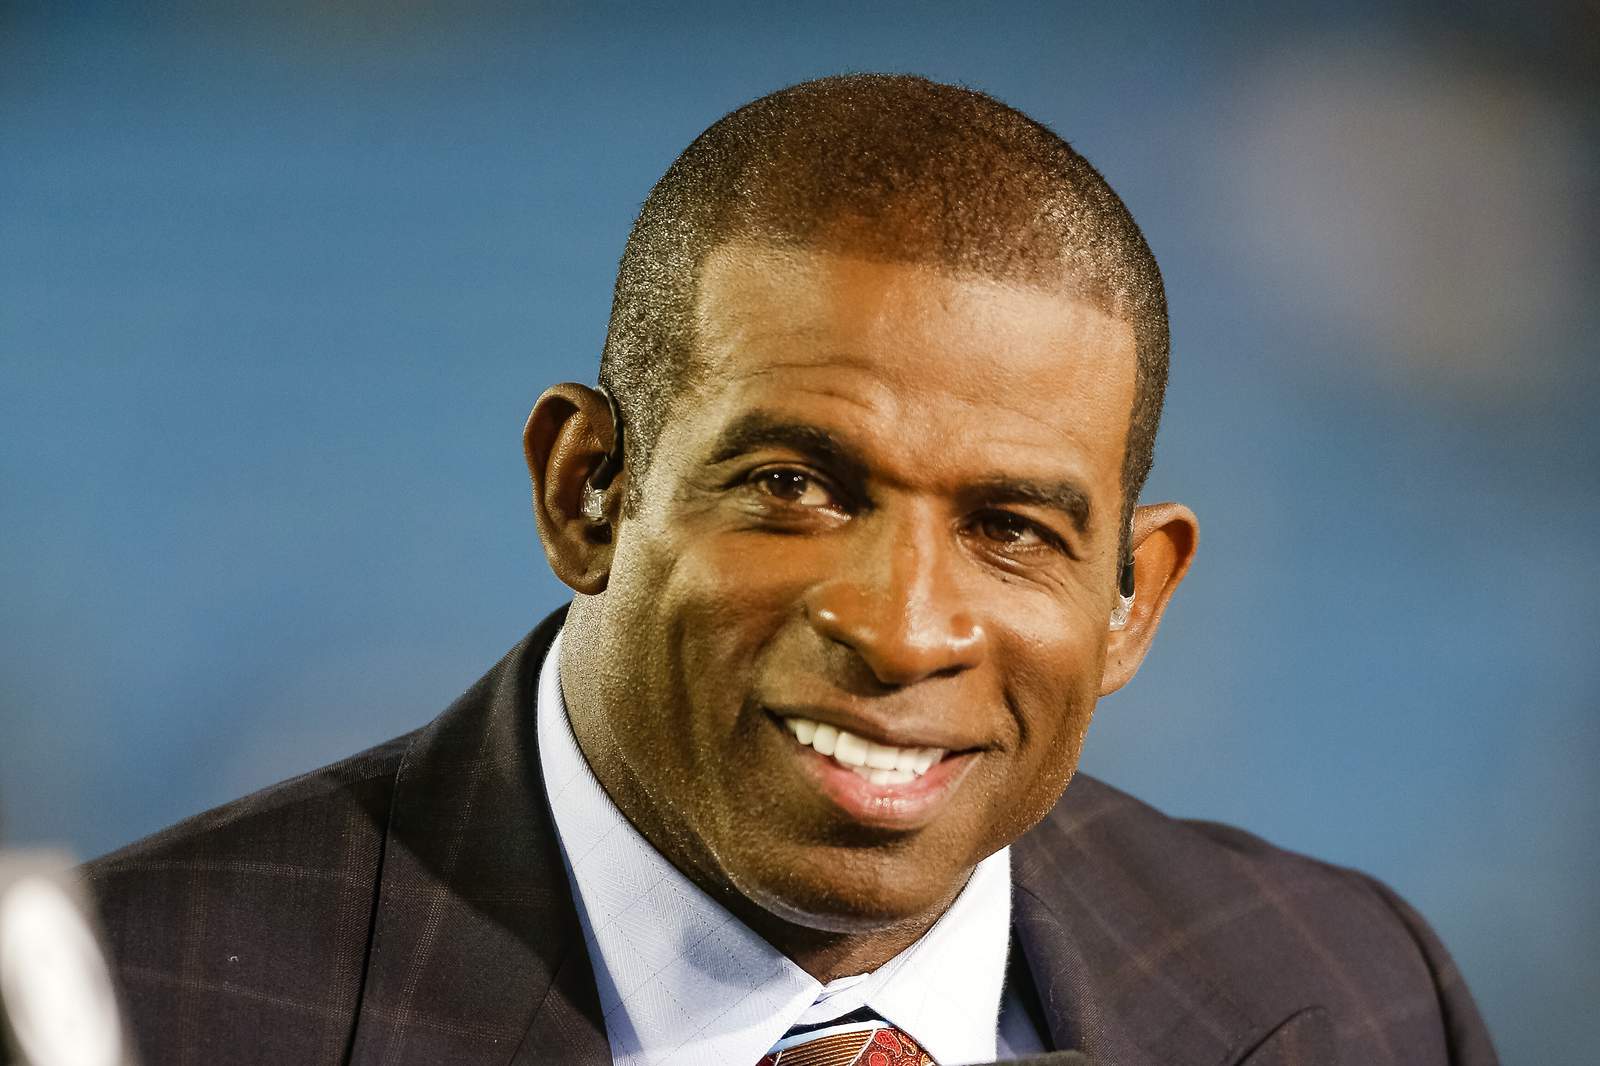 ‘Match made in heaven’: Deion Sanders to coach Jackson State